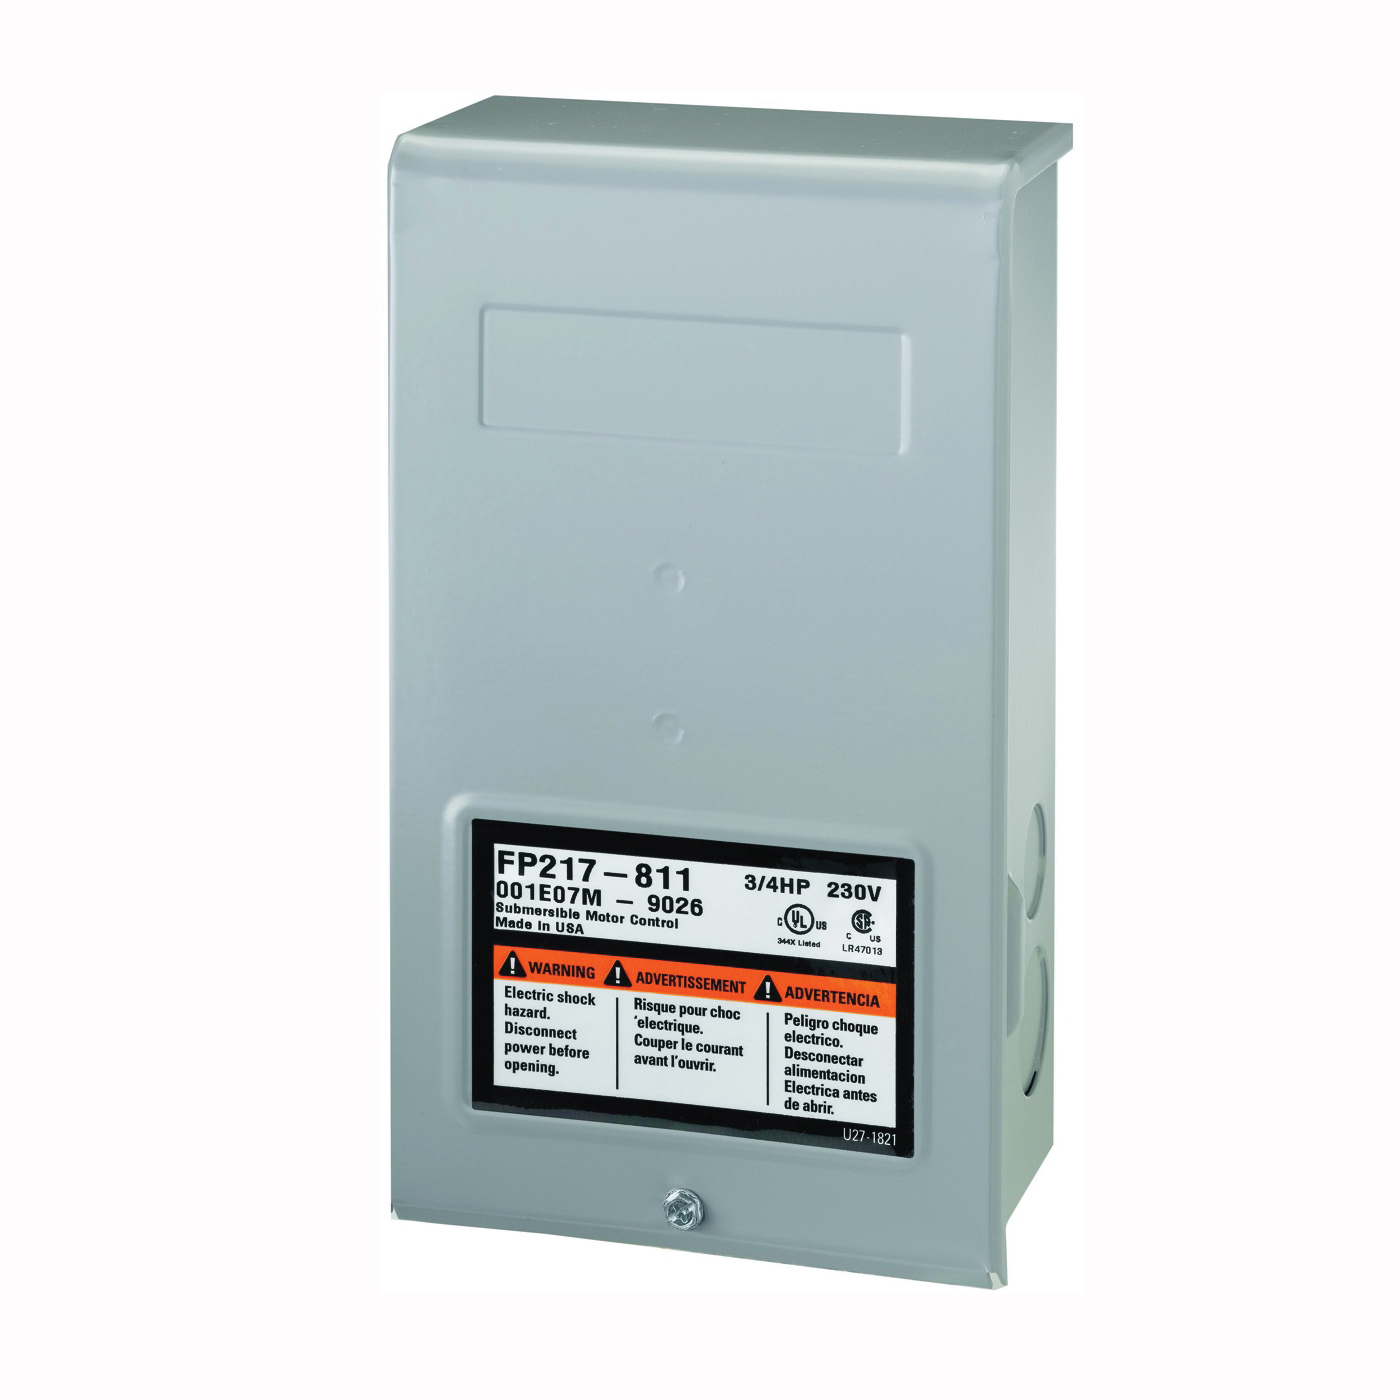 FP217-812 Control Box, 230 V, 1 hp, 3-Wire, Multiple Size Electrical Knockout, NEMA 3R Enclosure